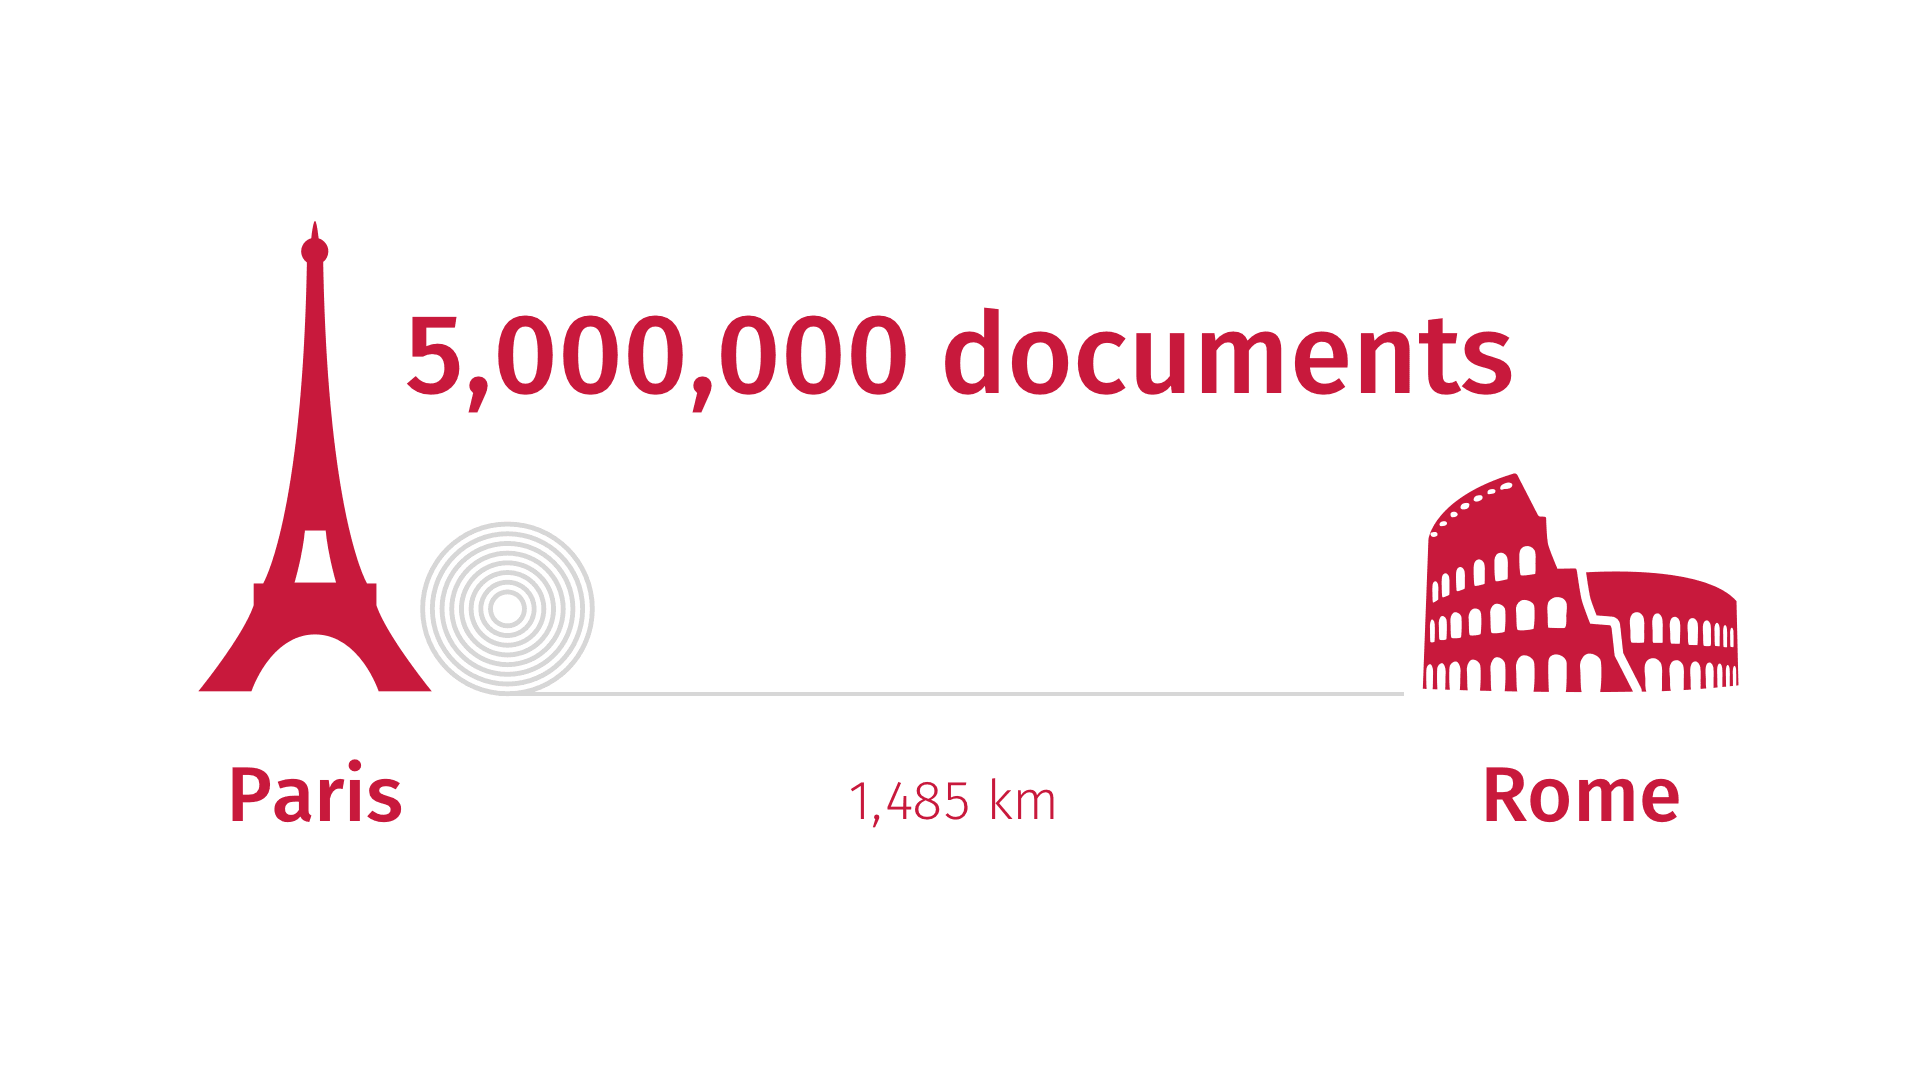 Scanbot (5M documents scanned infographic)